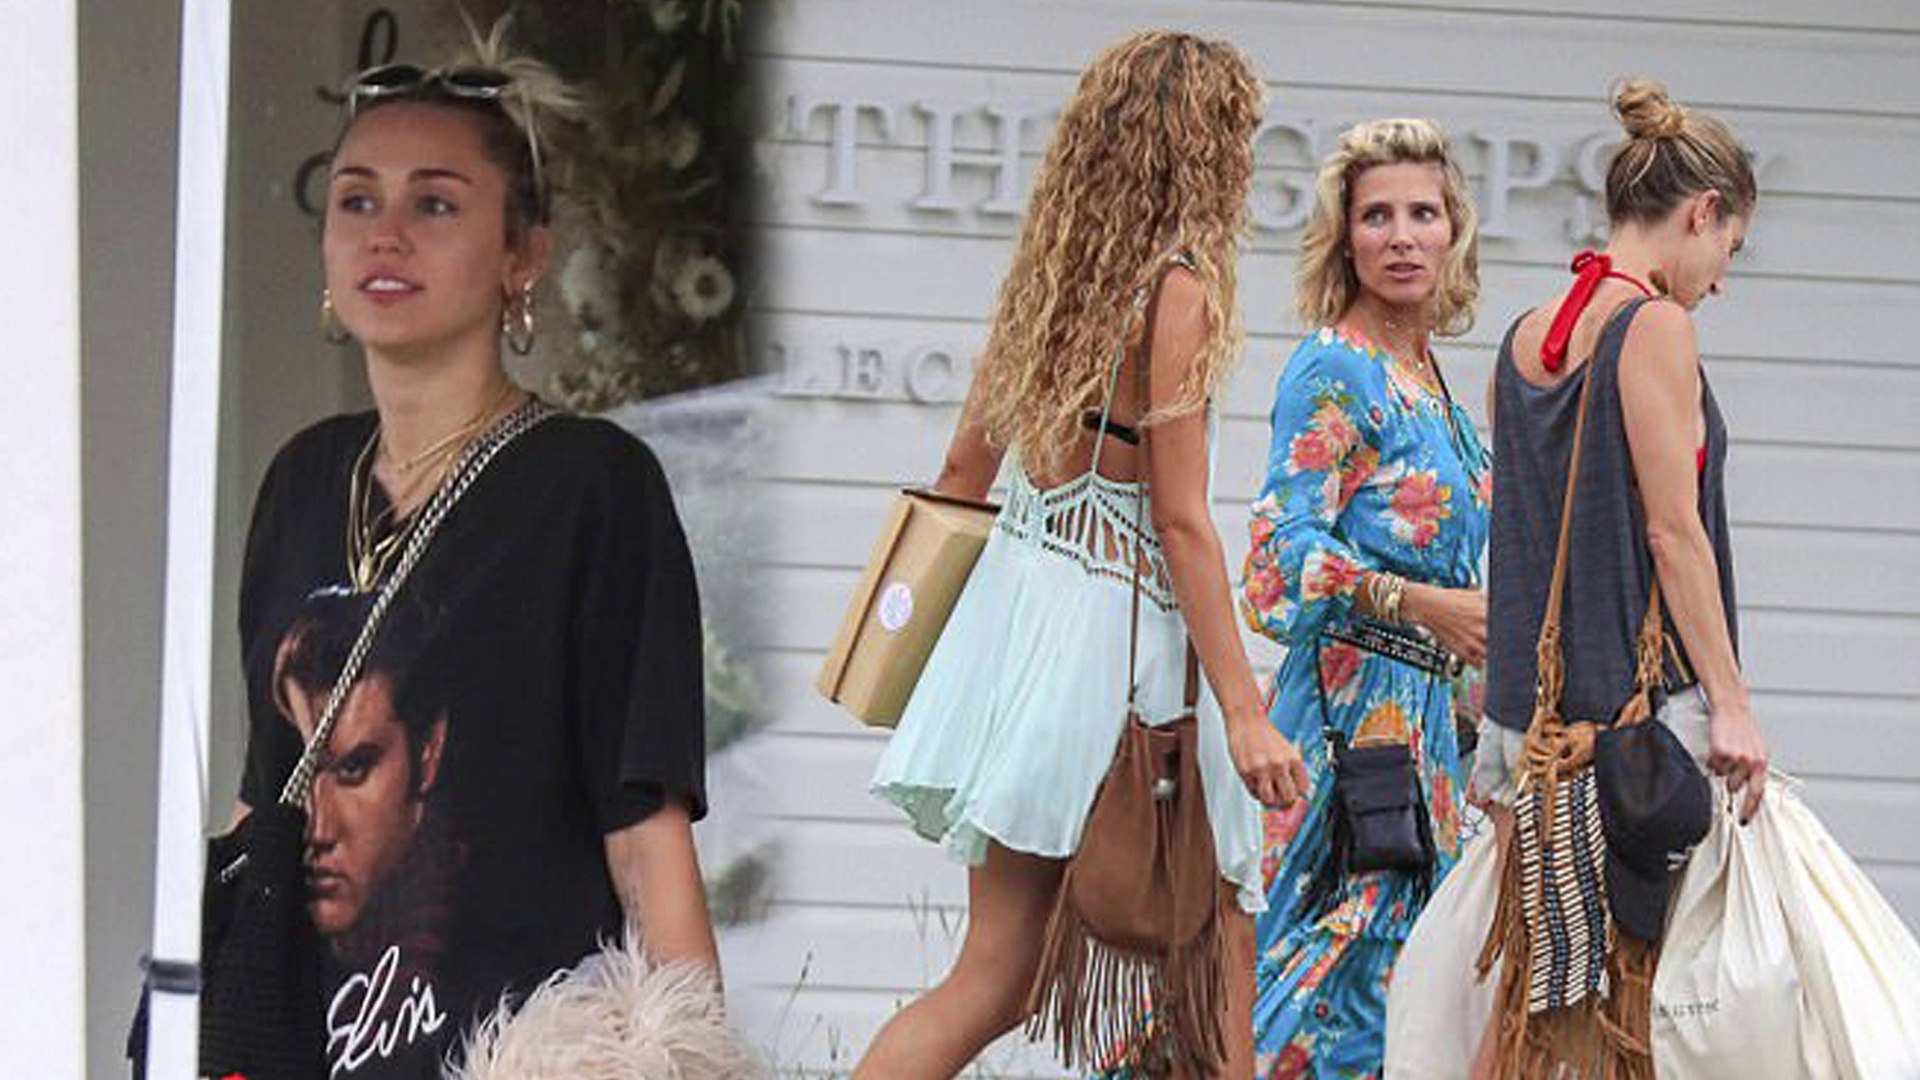 Miley Cyrus leaves fiancé Liam Hemsworth at home as she joins future sister-in-law Elsa Pataky for a